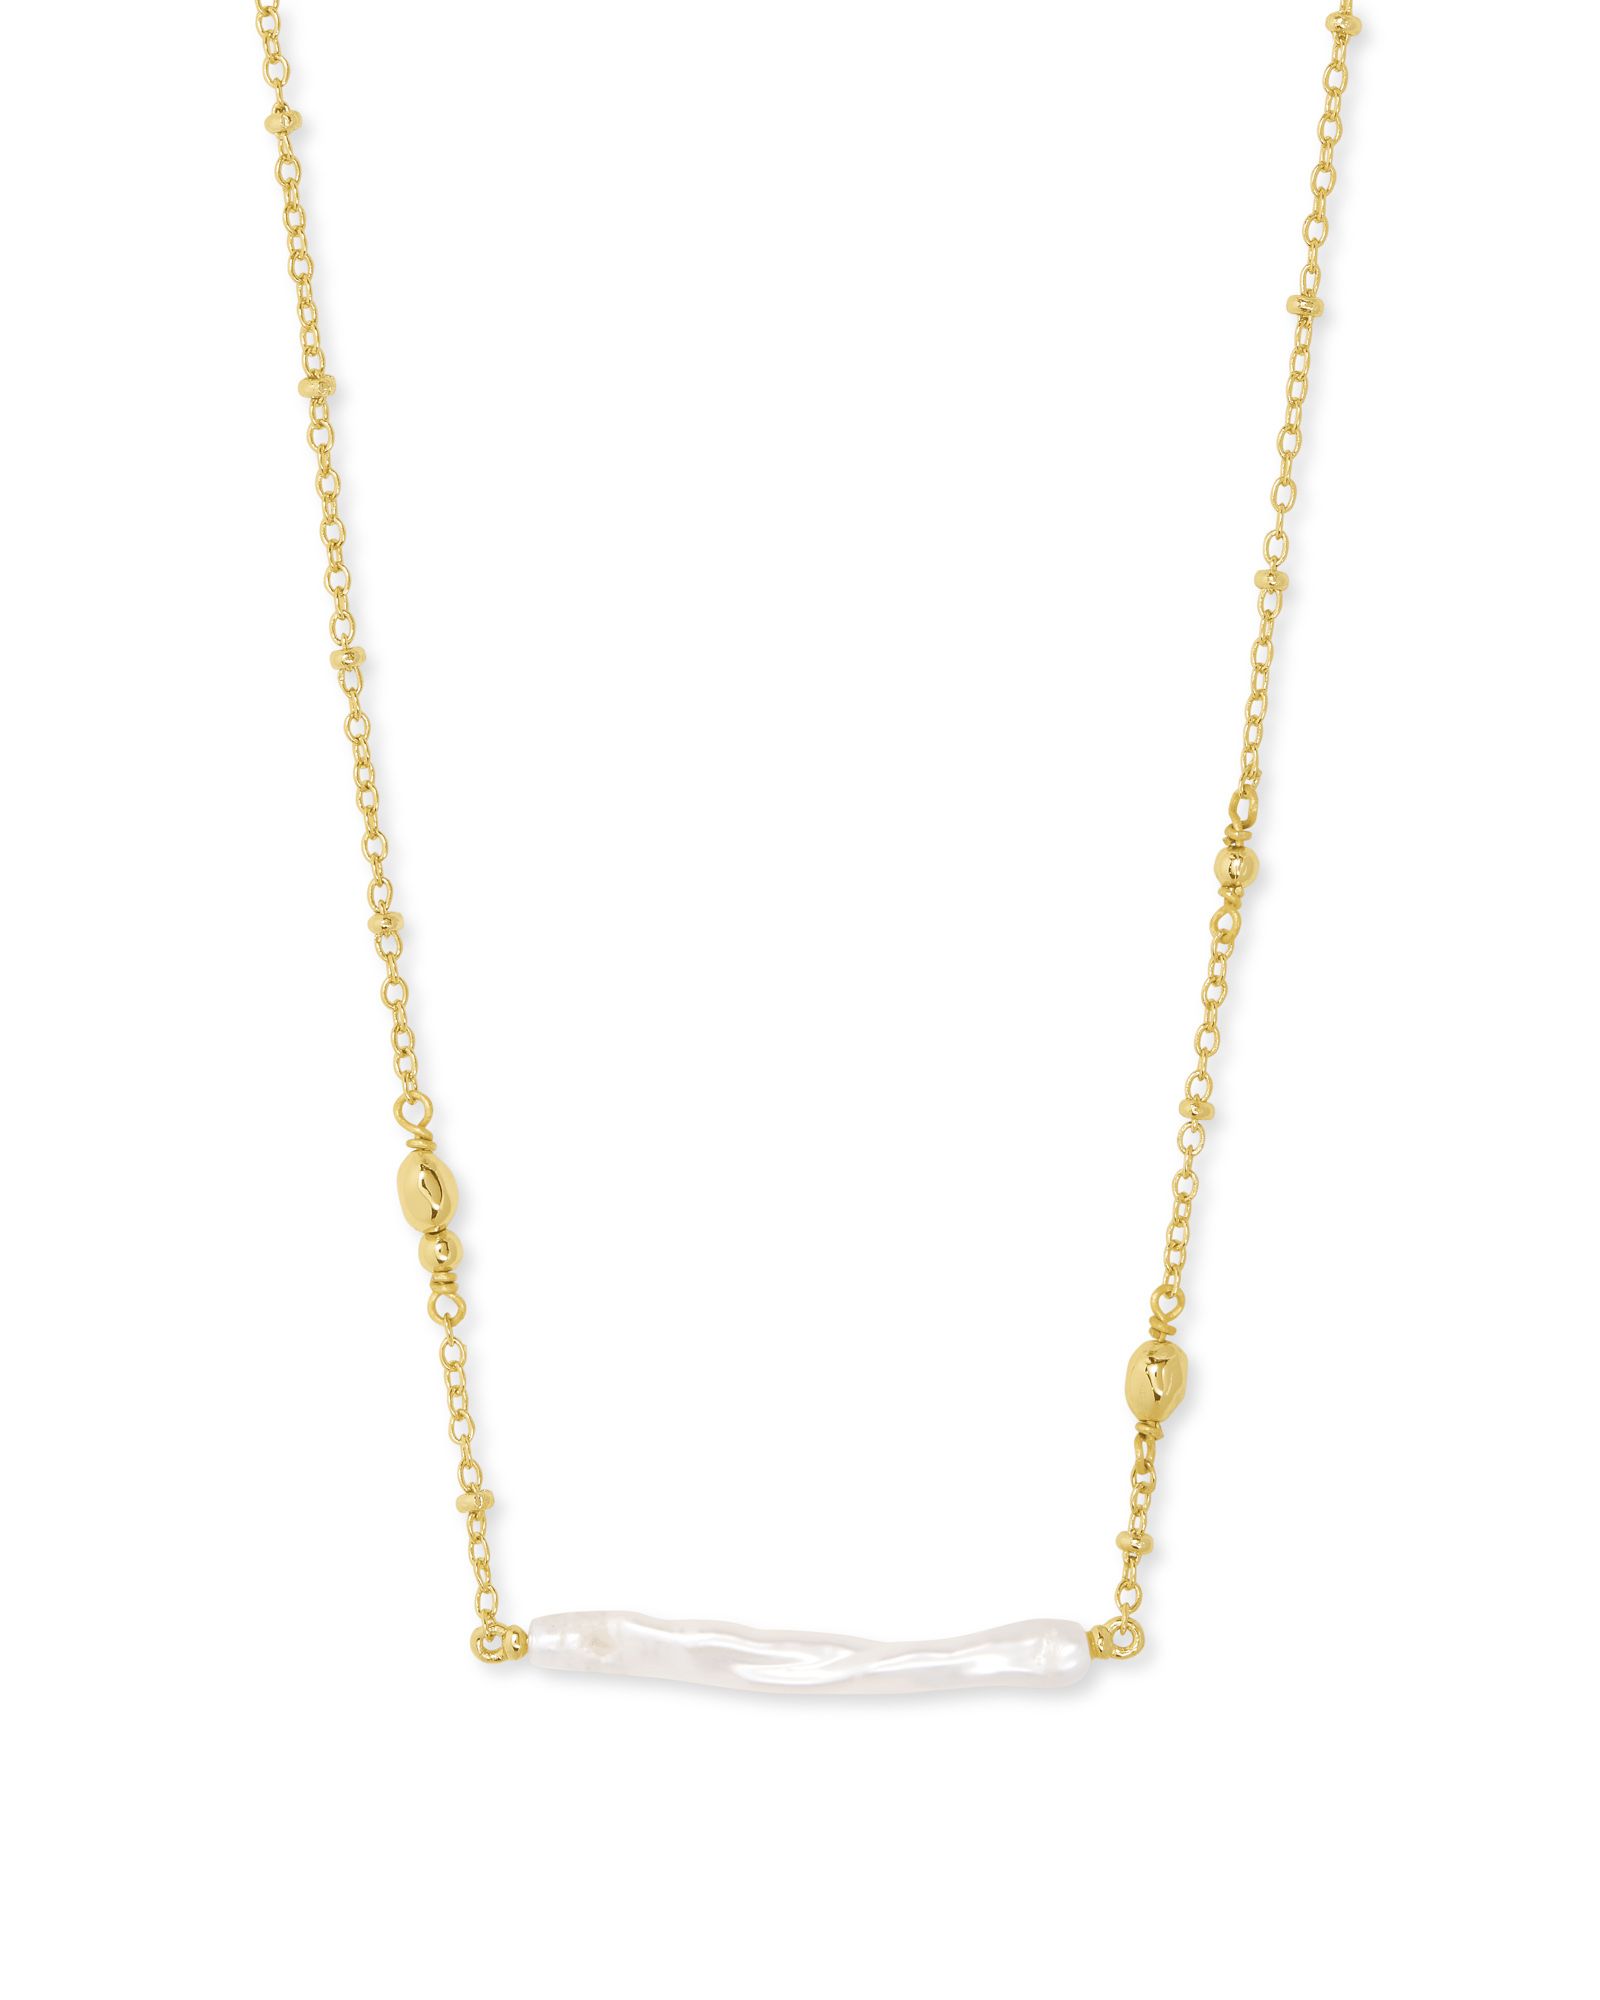 Eileen Gold Pendant Necklace in White Pearl | Kendra Scott